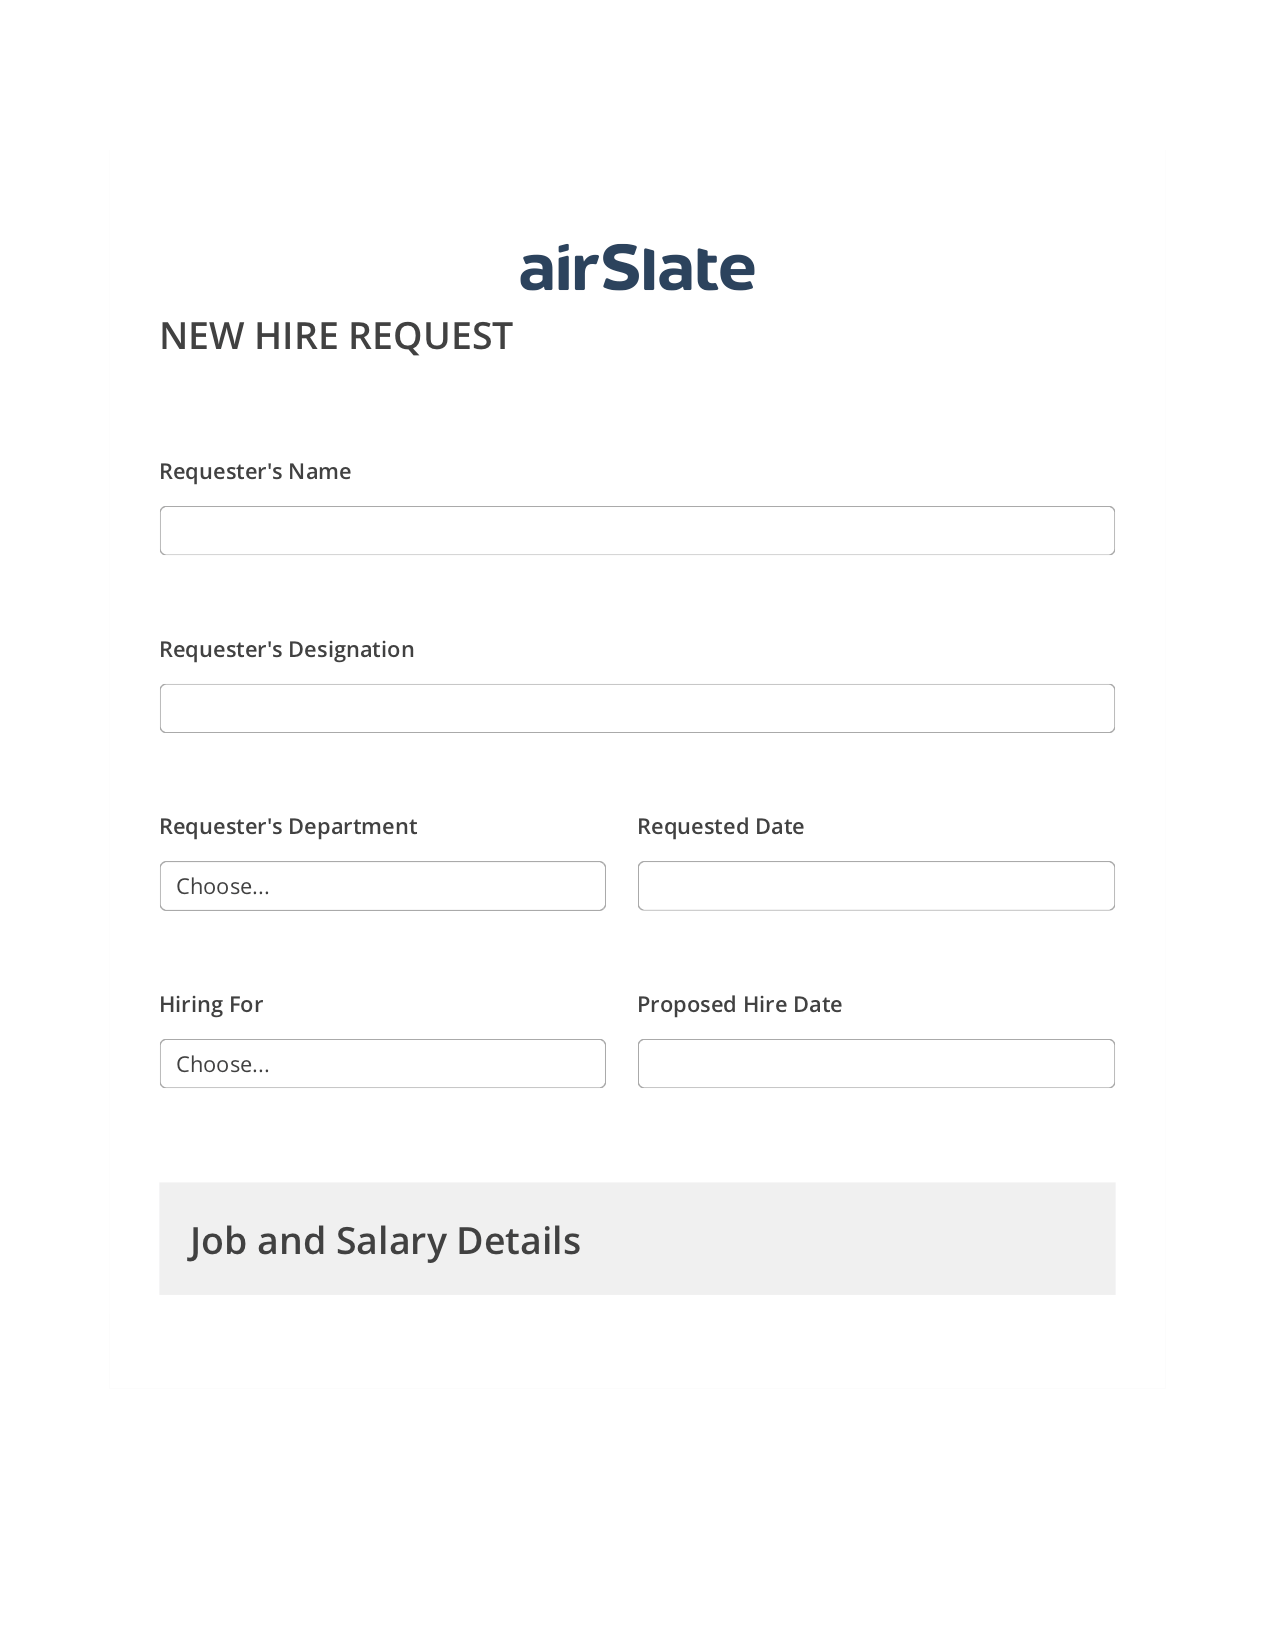 Multirole Hiring Request Workflow Pre-fill Dropdowns from Excel Bot, Create slate from another Flow Bot, Archive to Box Bot